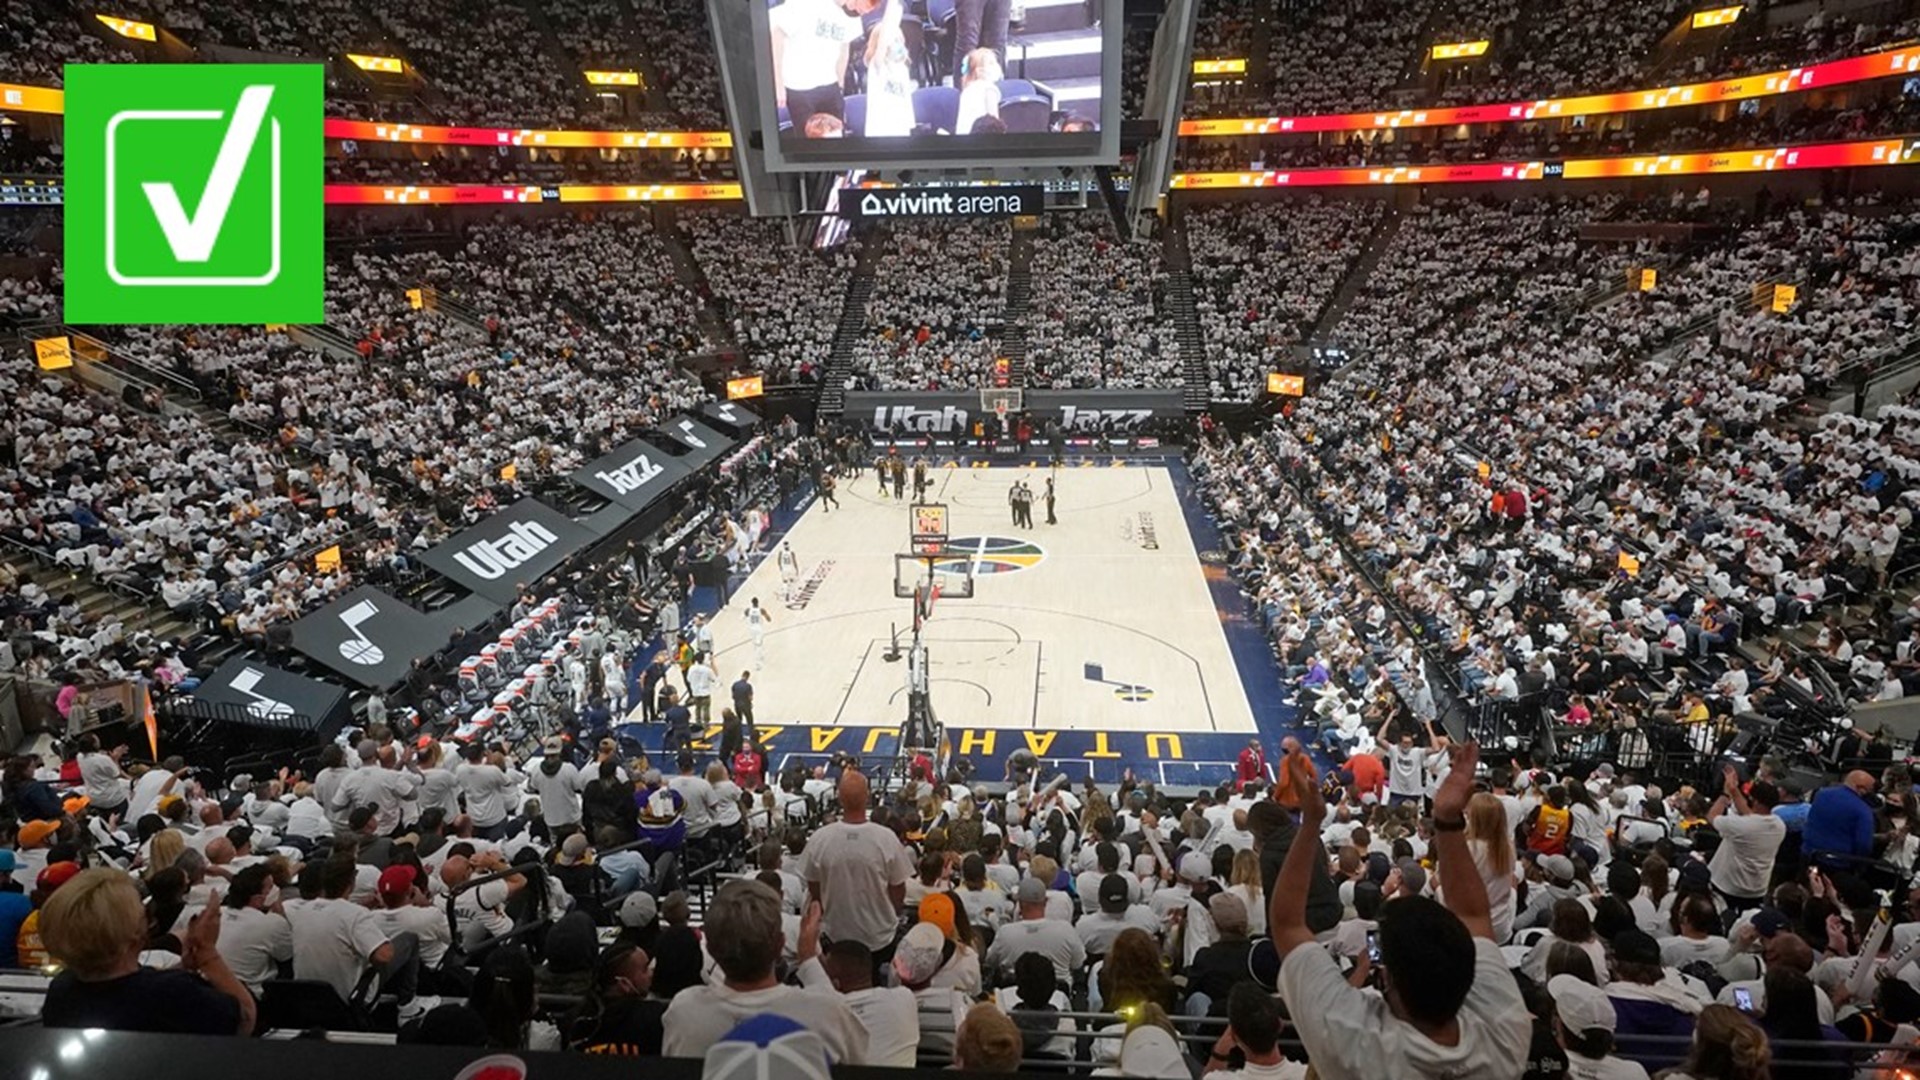 Several fans at NBA playoff games were banned from arenas for unruly behavior.